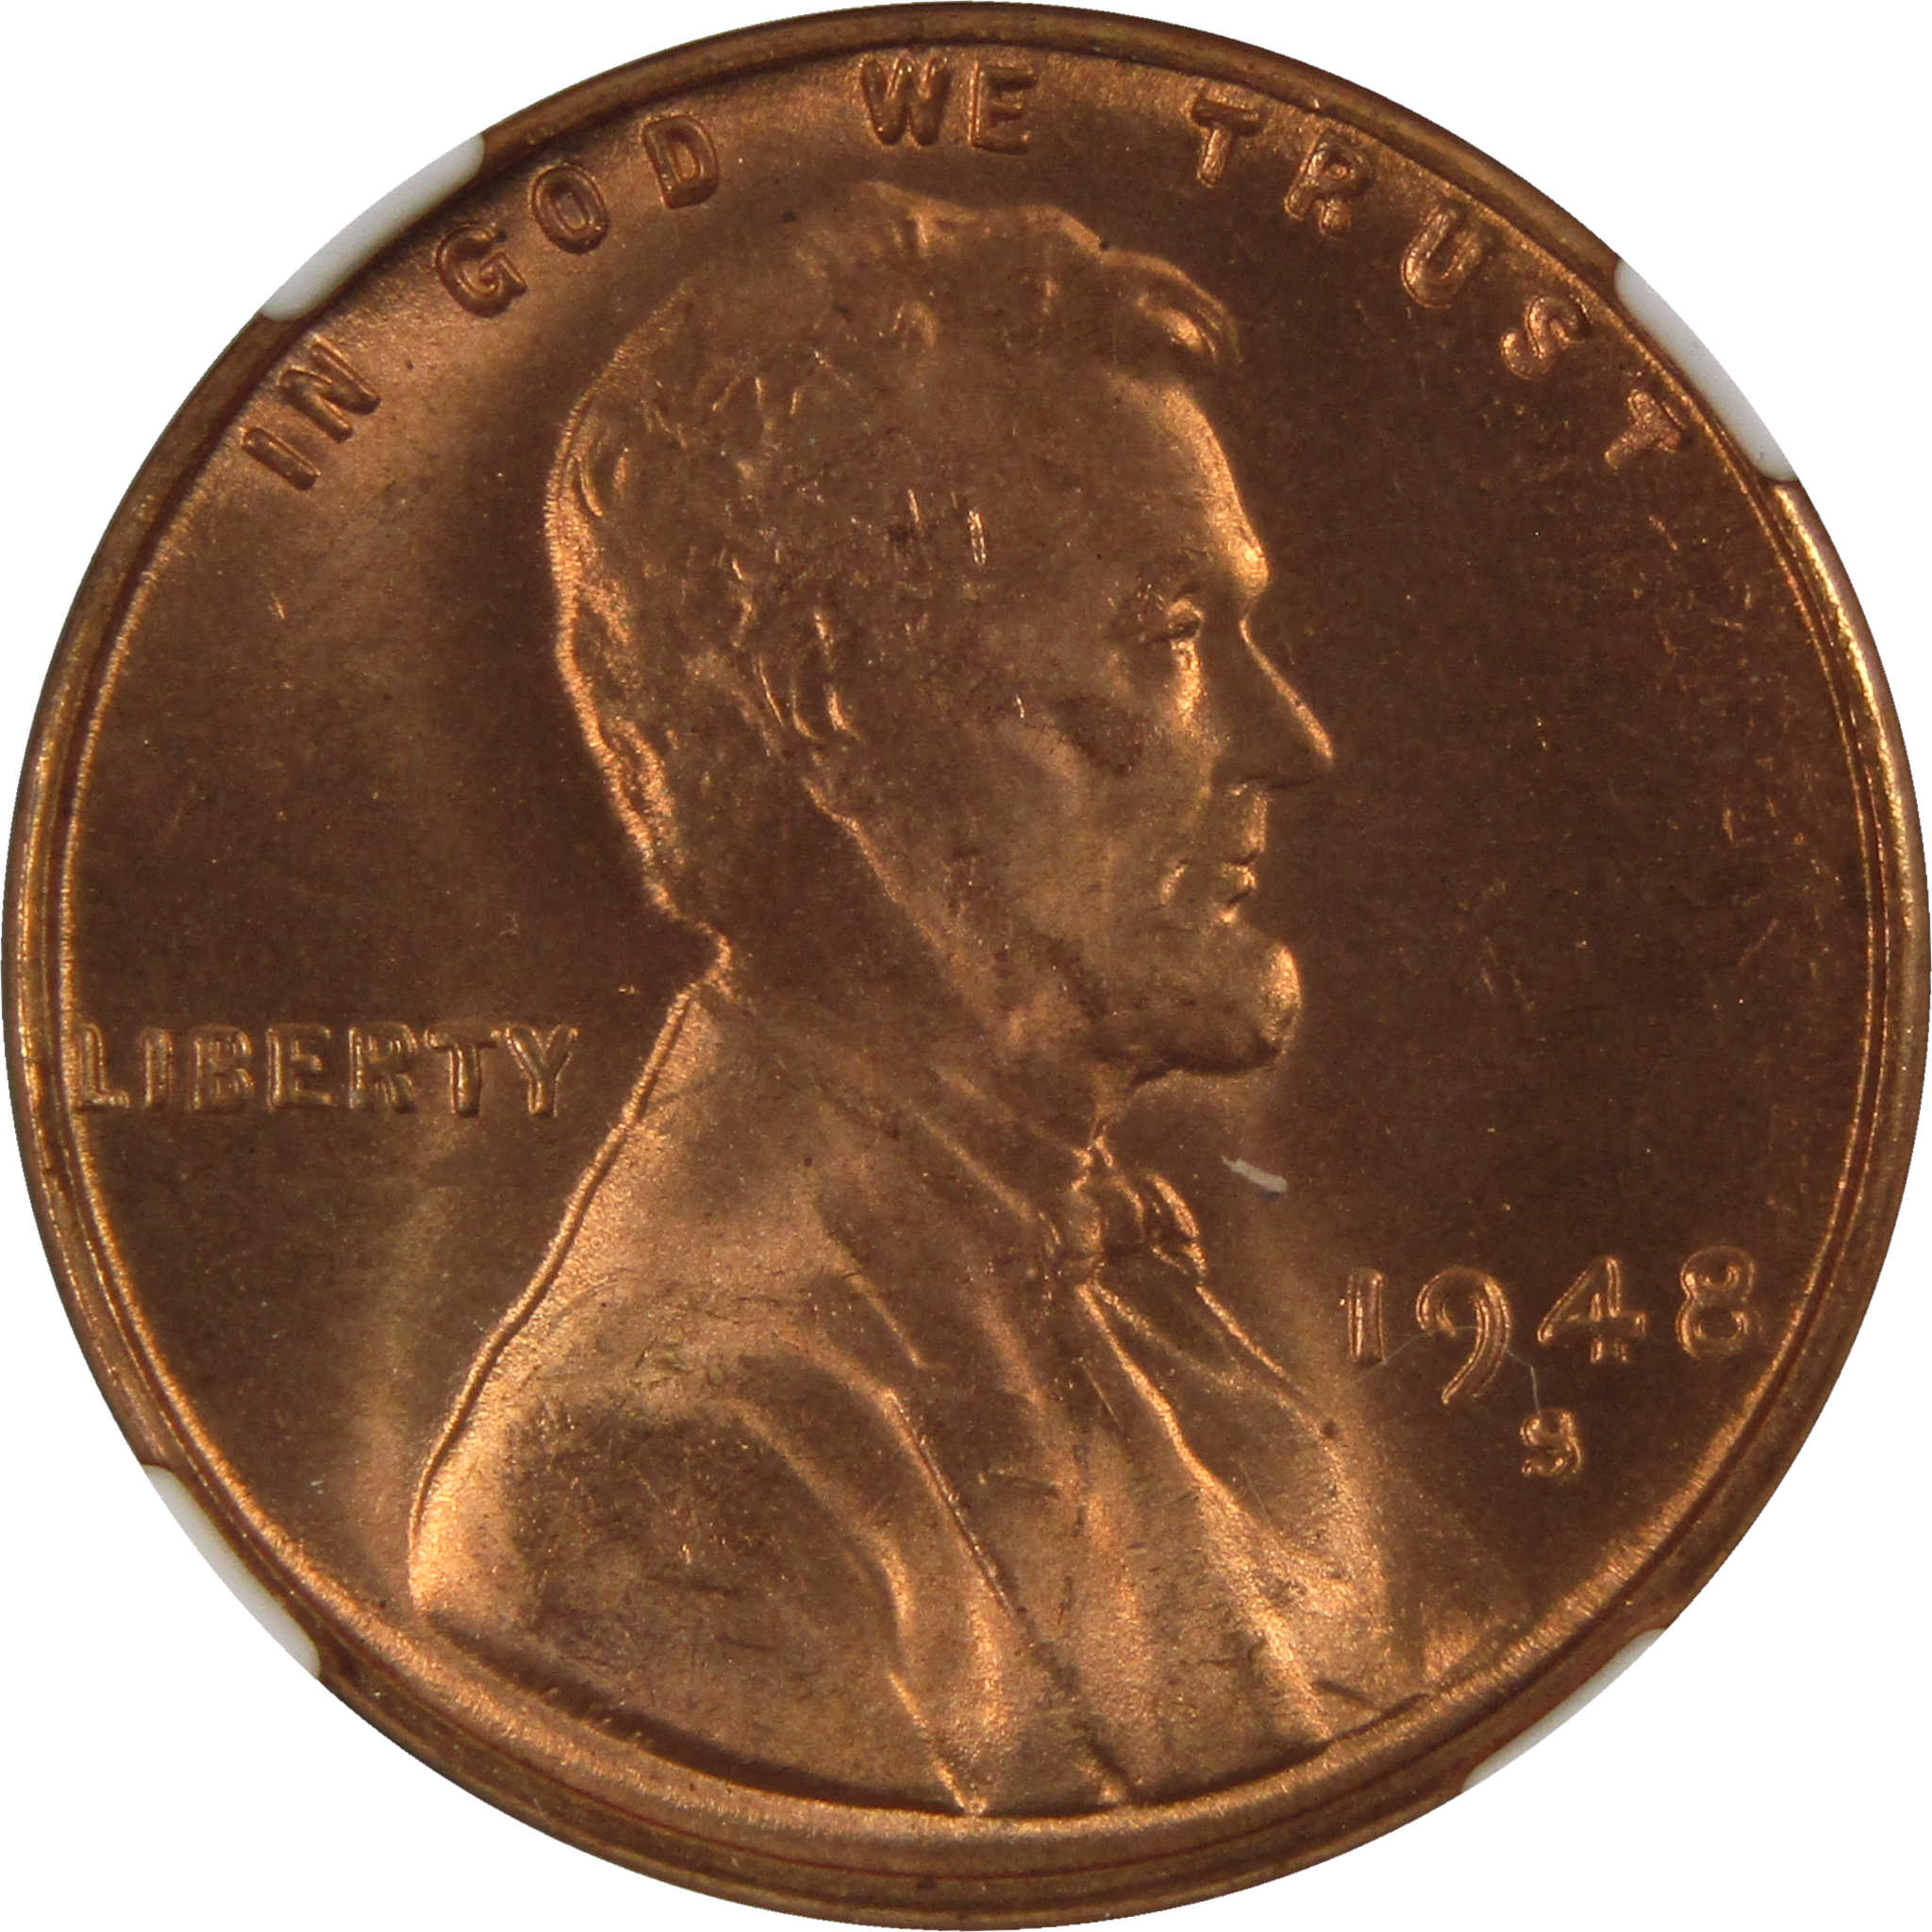 1948 S Lincoln Wheat Cent MS 67 RD NGC Penny Uncirculated SKU:I3637